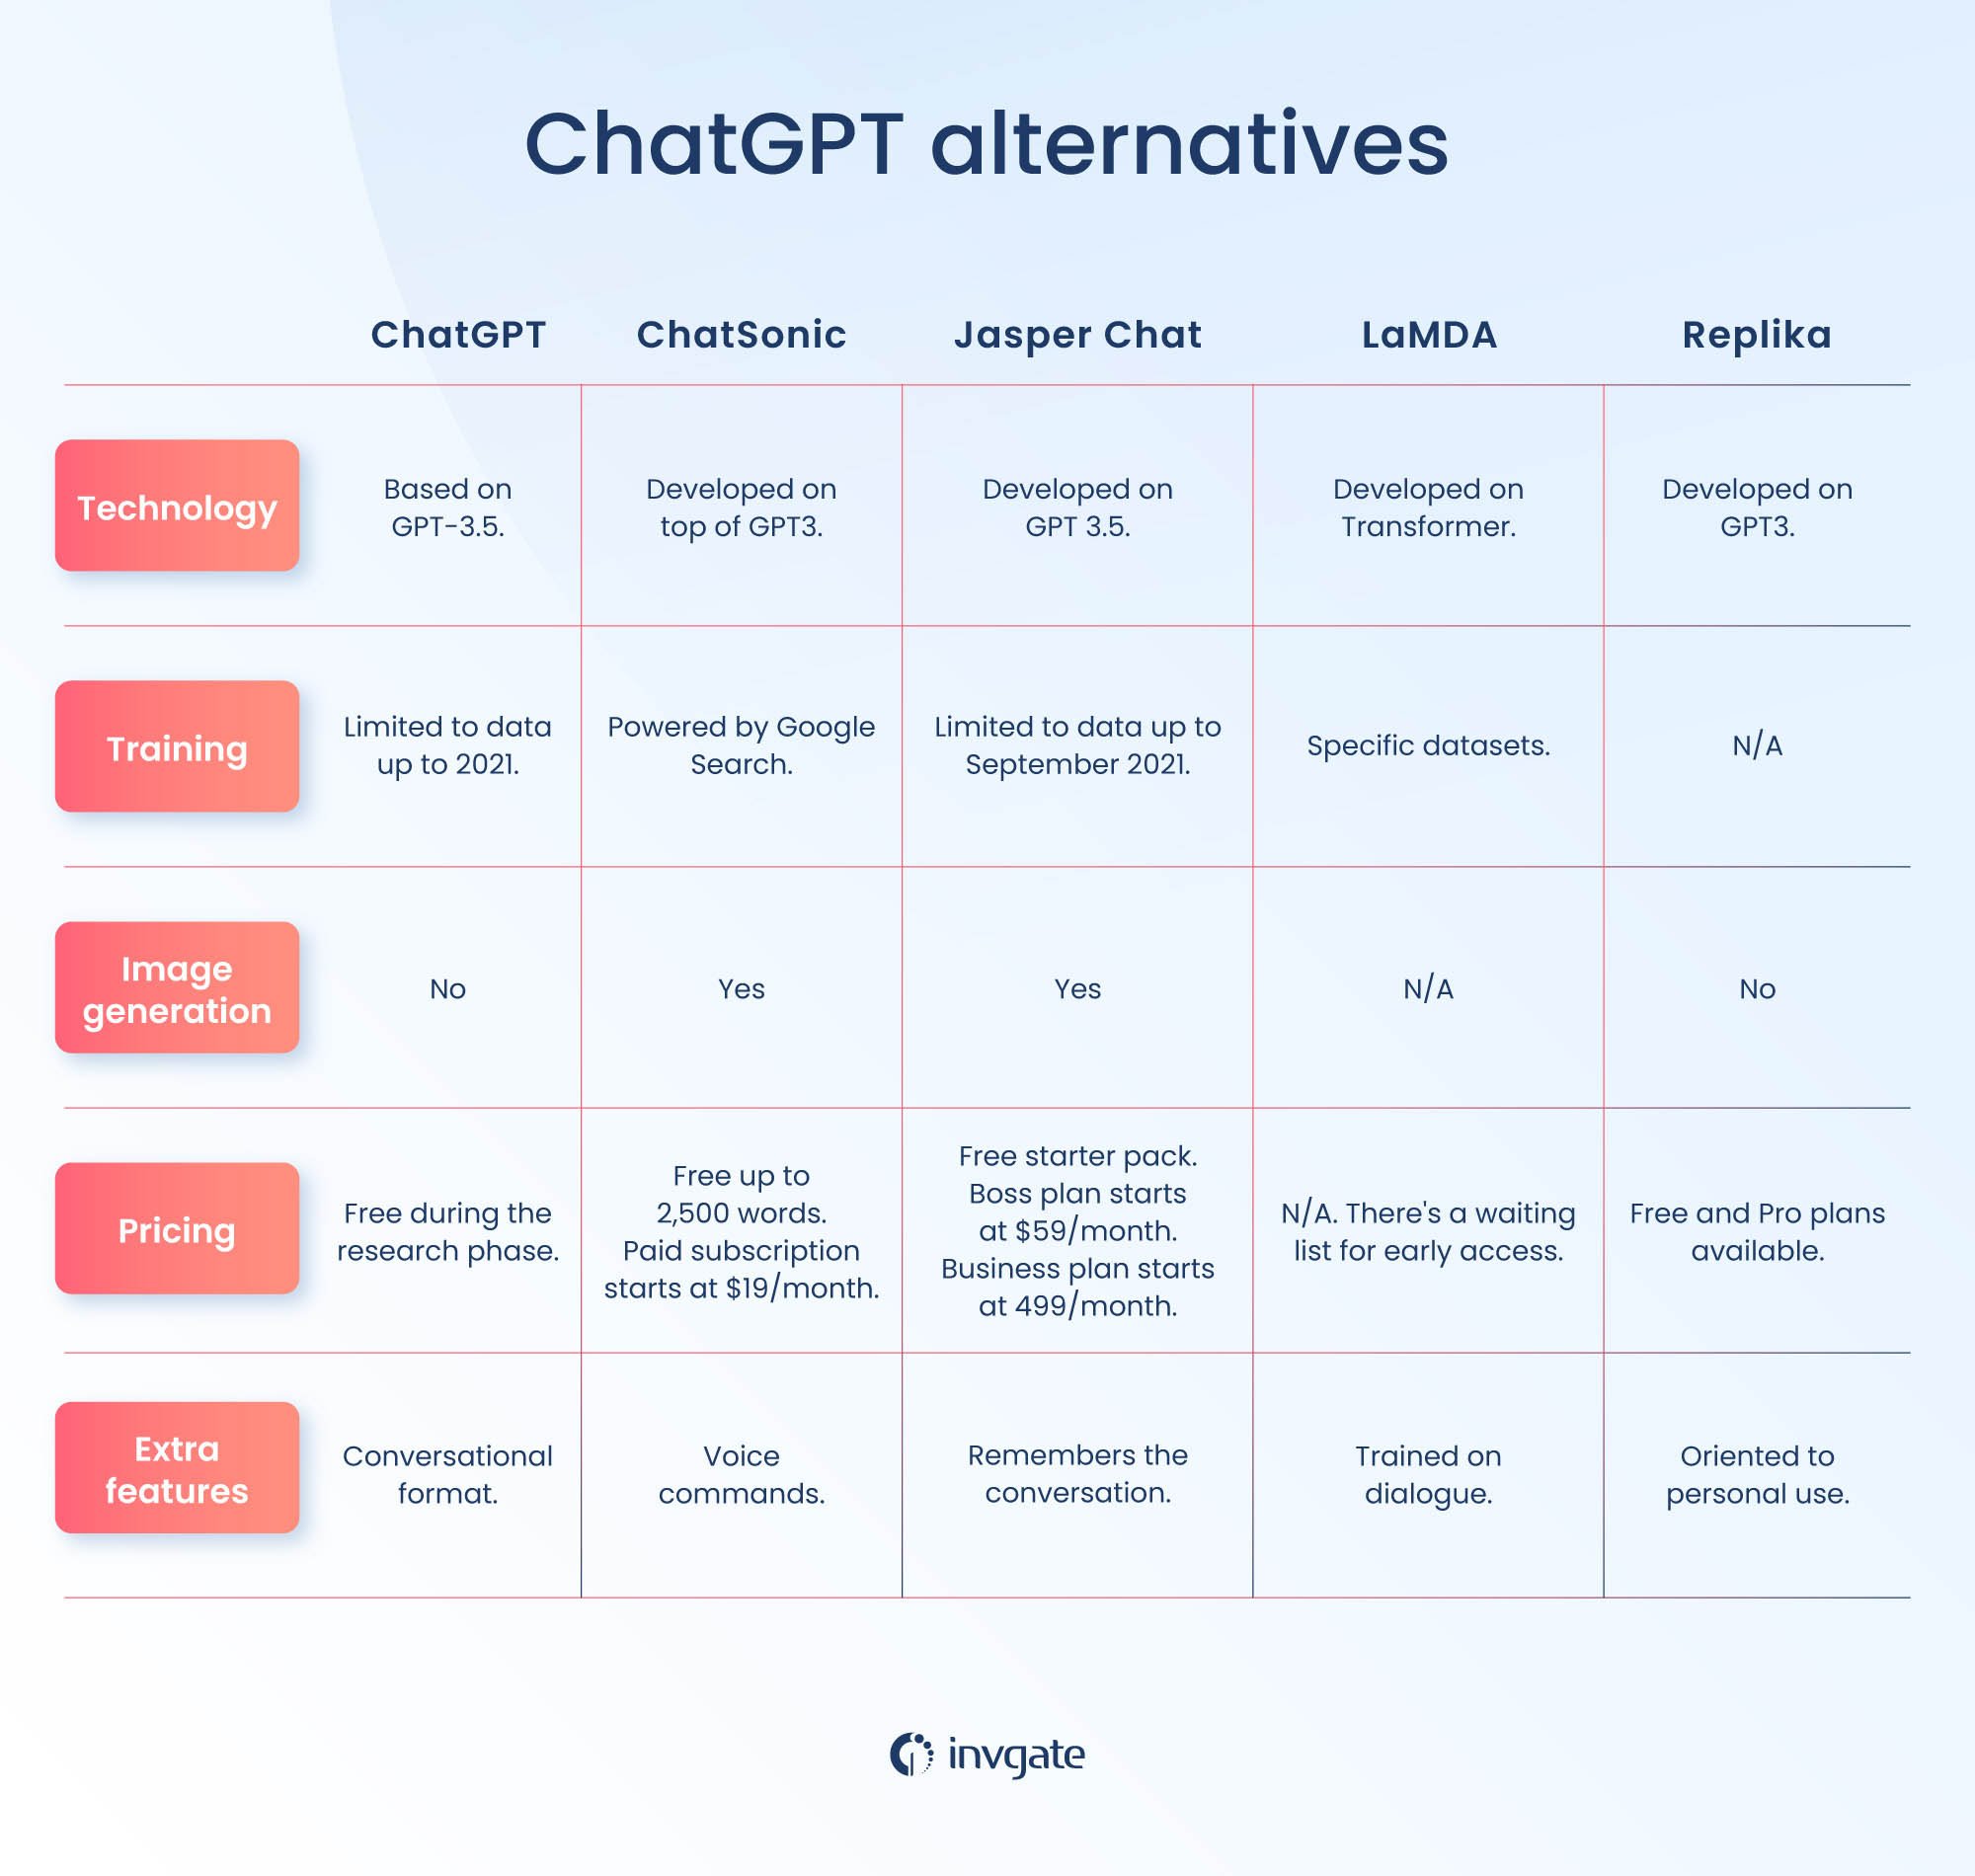 Comparison among some of the most popular ChatGPT alternatives.